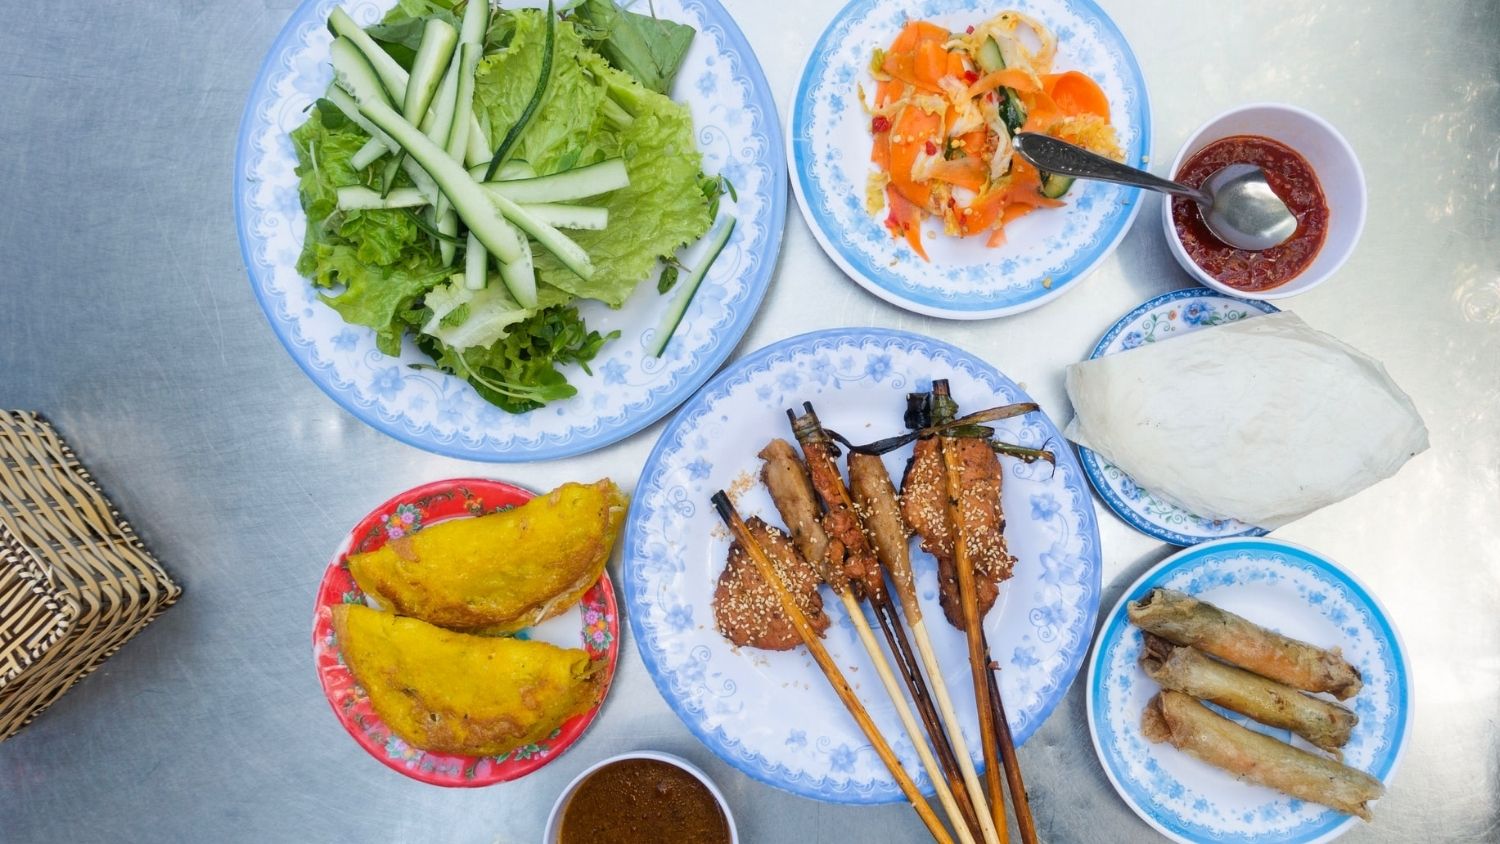 How to Eat Like a Local in Vietnam